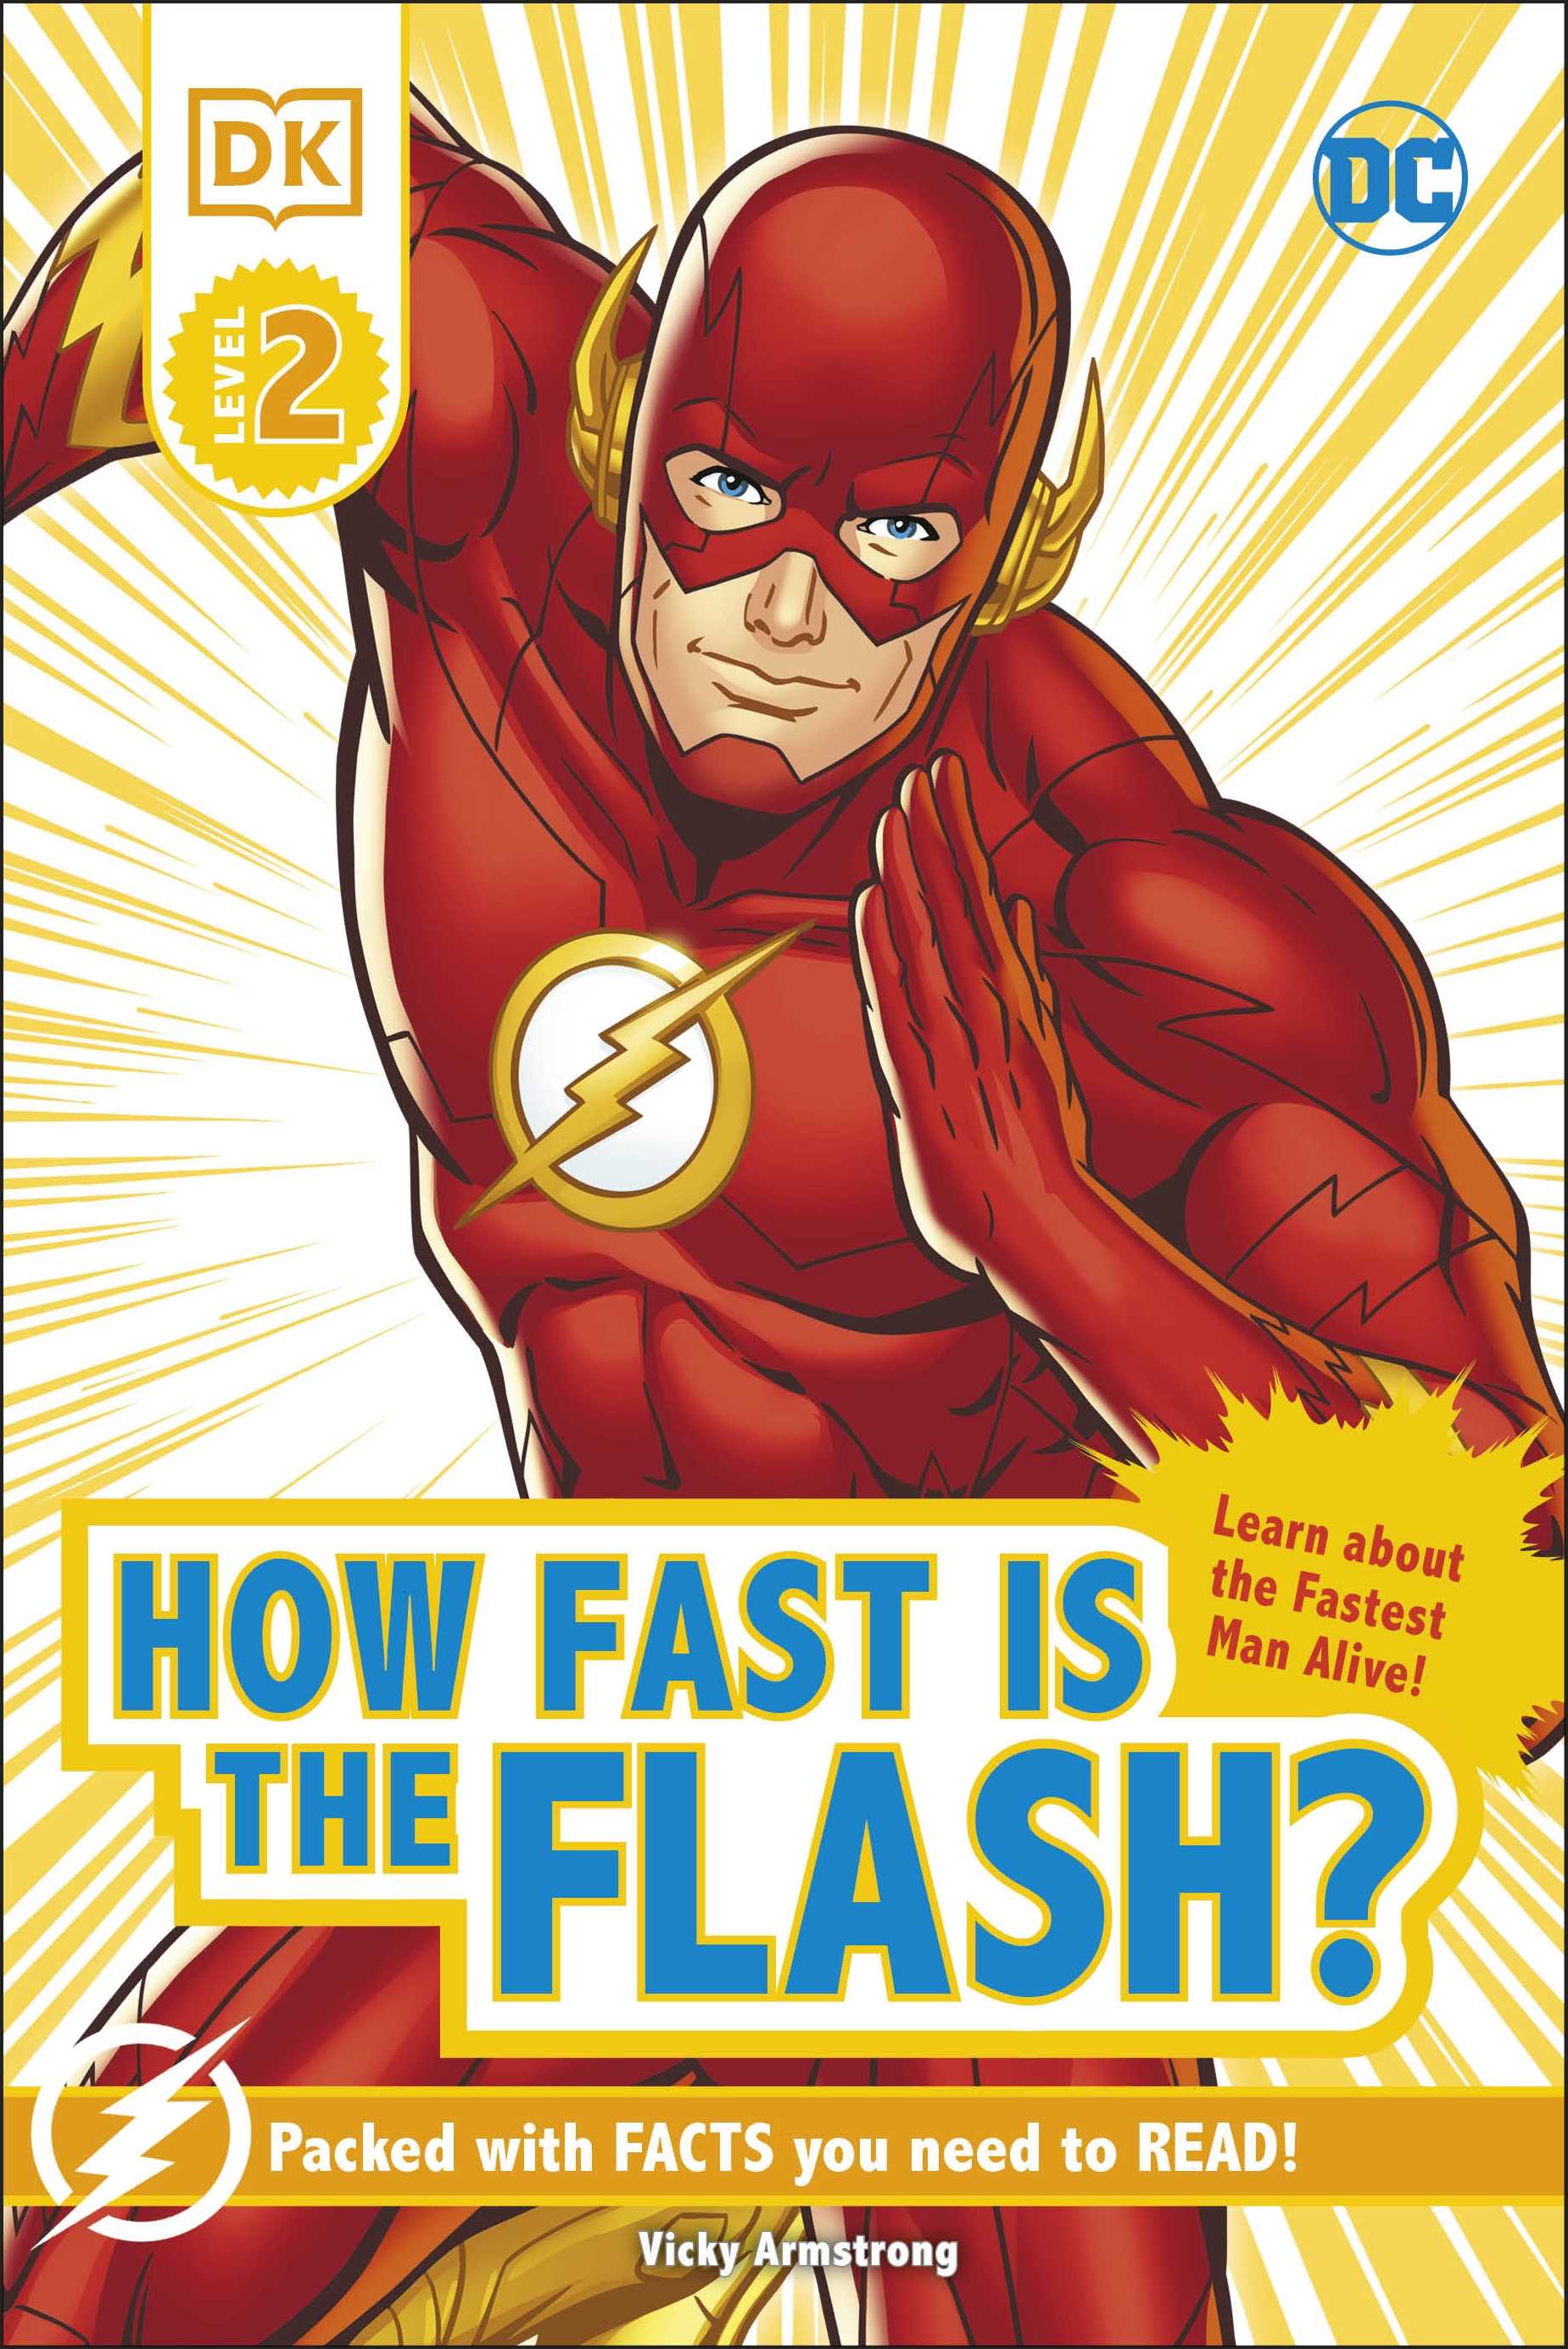 DC How Fast Is The Flash?